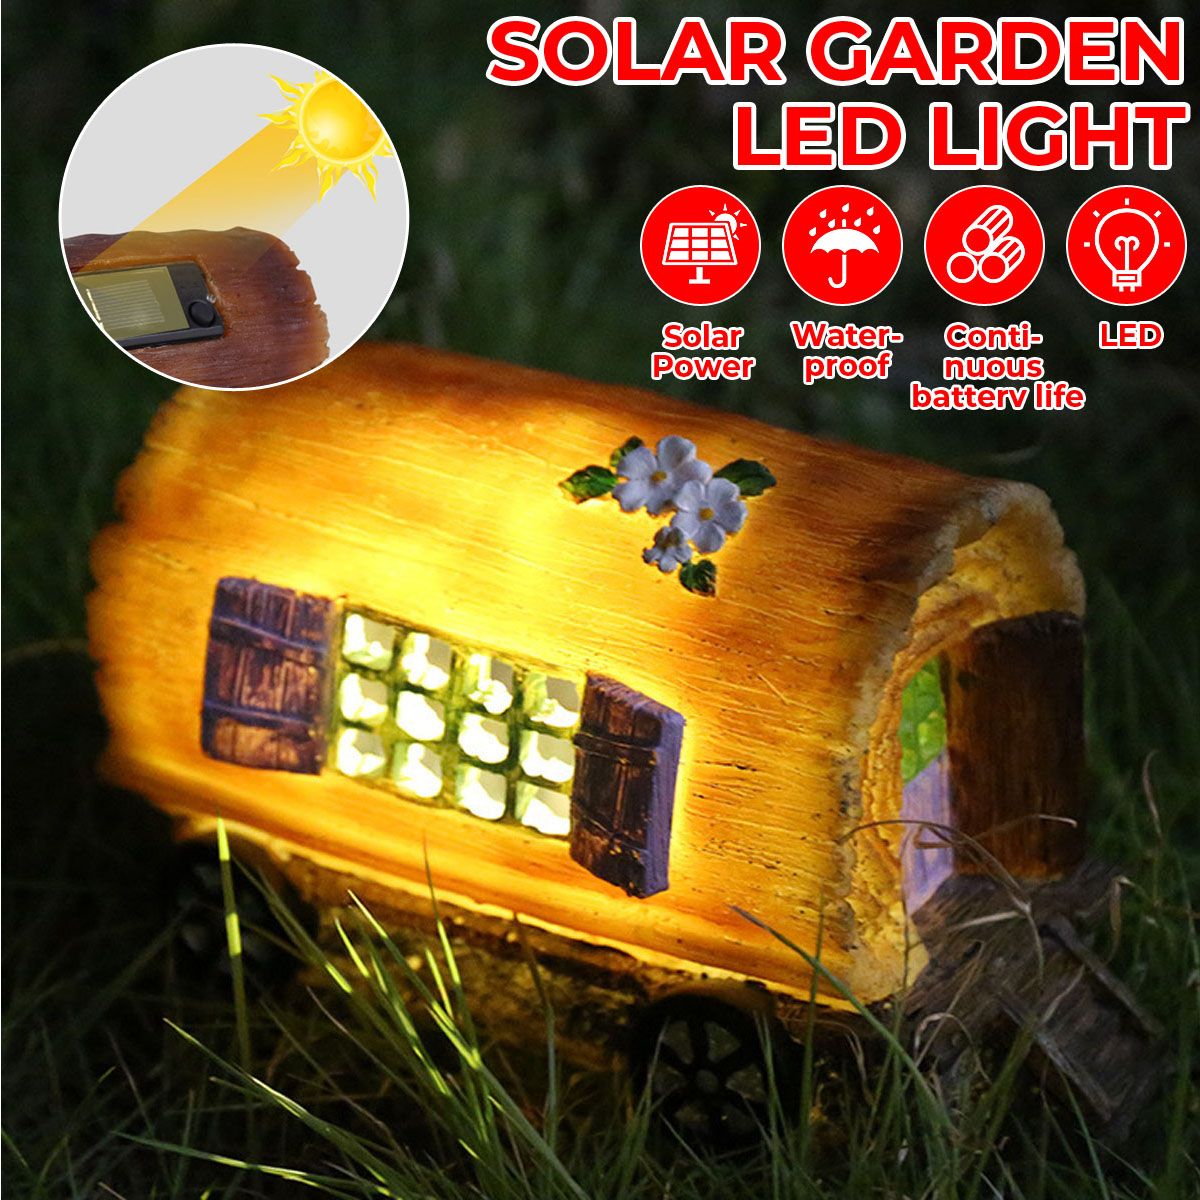 Waterproof-Solar-Powered-CarHouse-LED-Lawn-Lamp-Outdoor-Garden-Decoration-Gift-Light-1744880